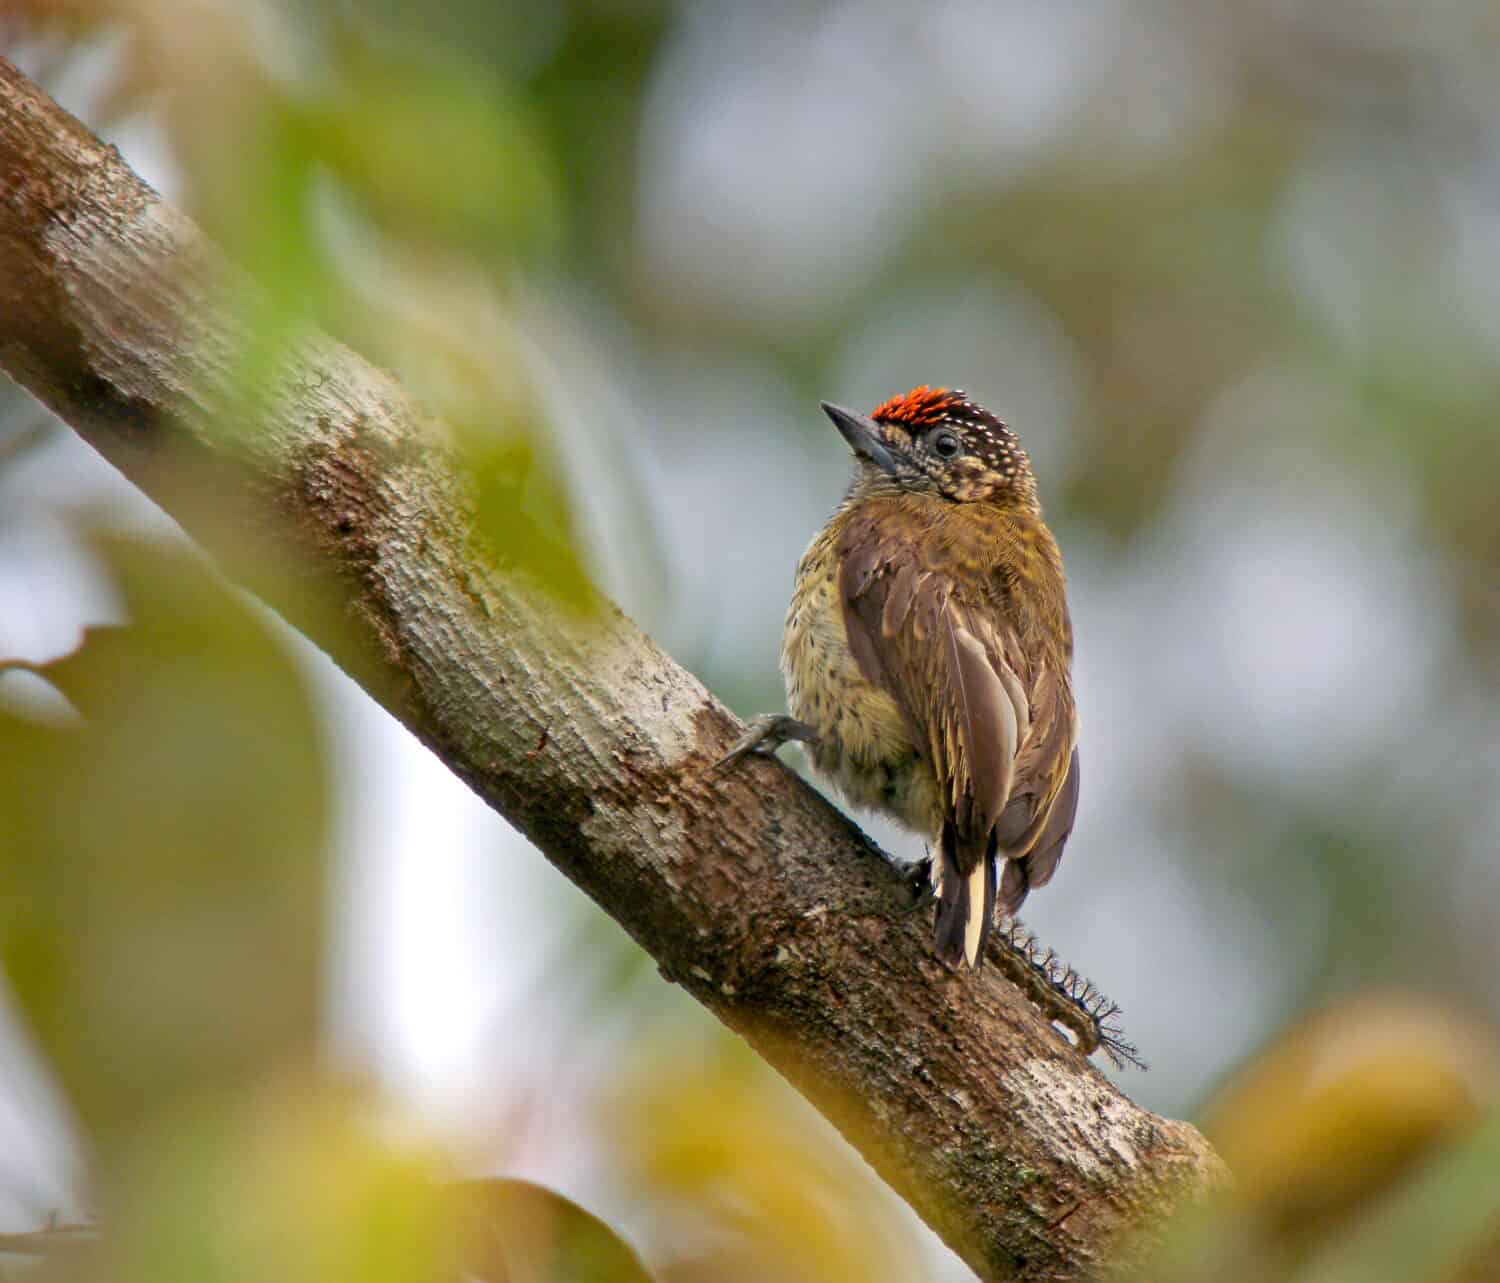 Black-dotted piculet (Picumnus nigropunctatus)  perched on a small twig                              